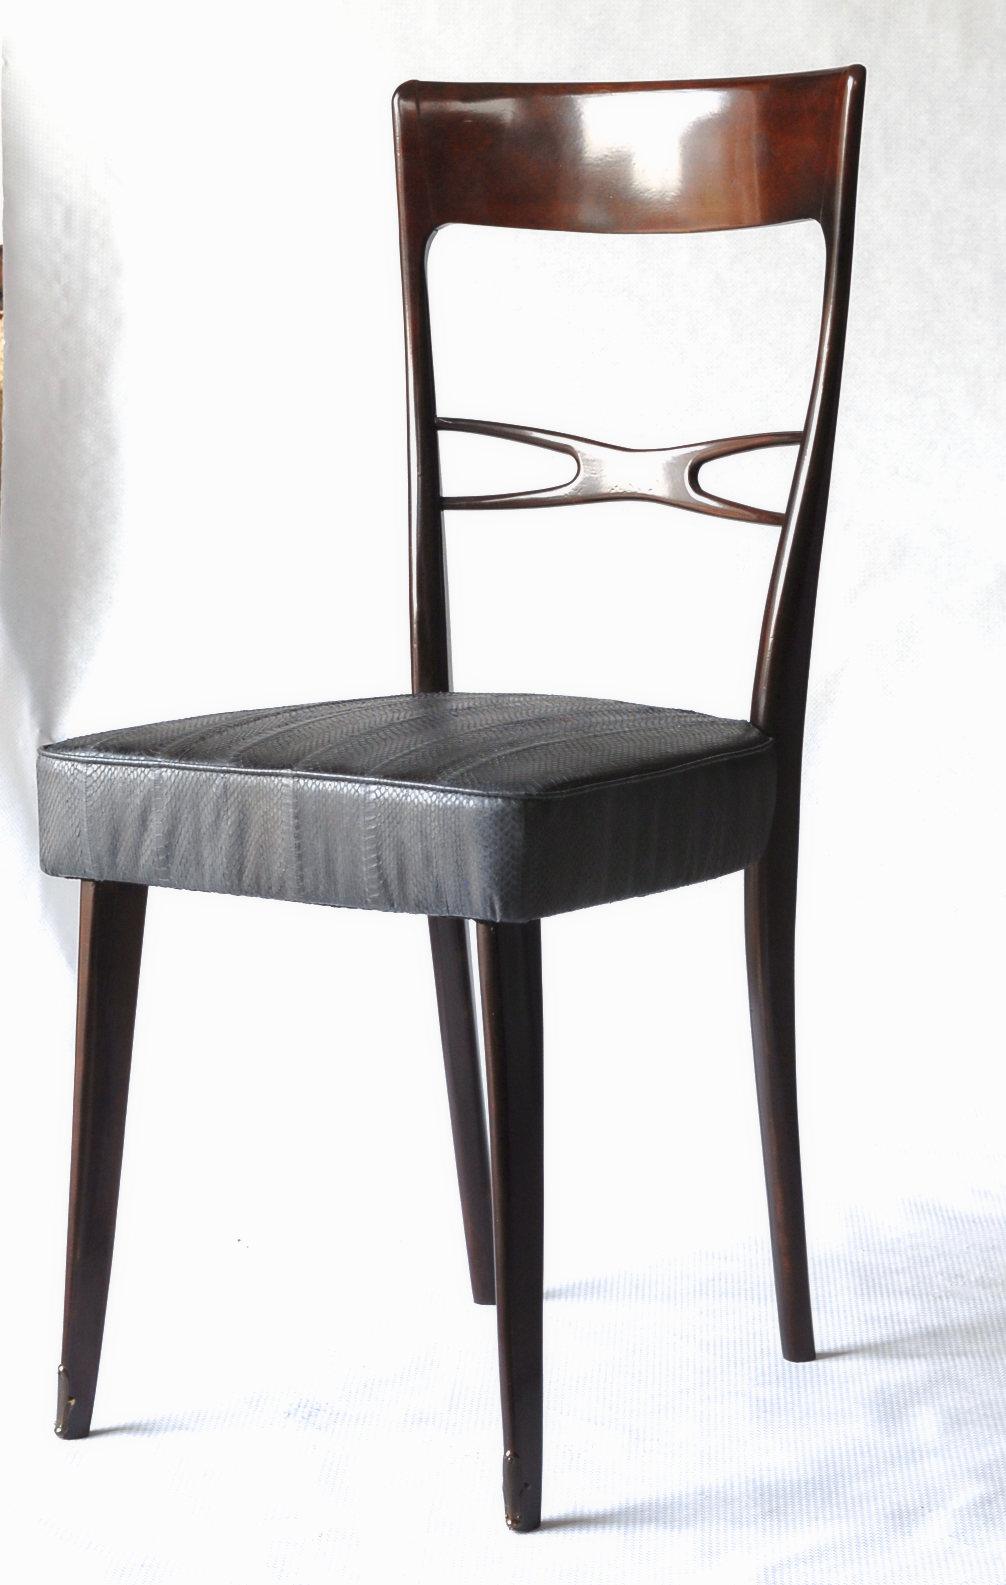 Italian Melchiorre Bega Six Dining Chairs Glossy Finish, water snake skin box seated 50s